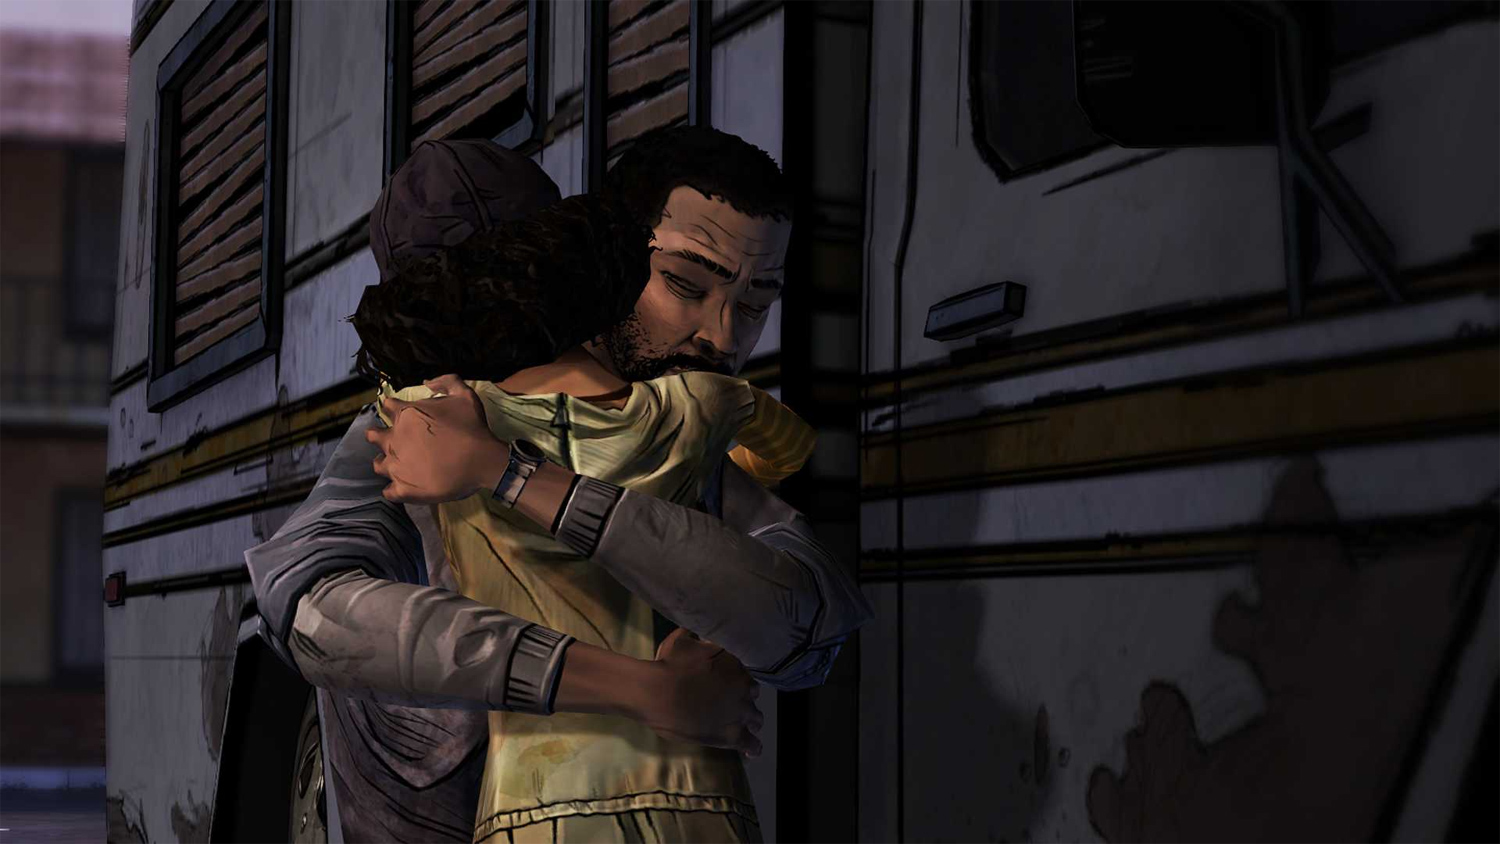 telltale games ceo dan connors on the walking dead fables and building a television studio model for game